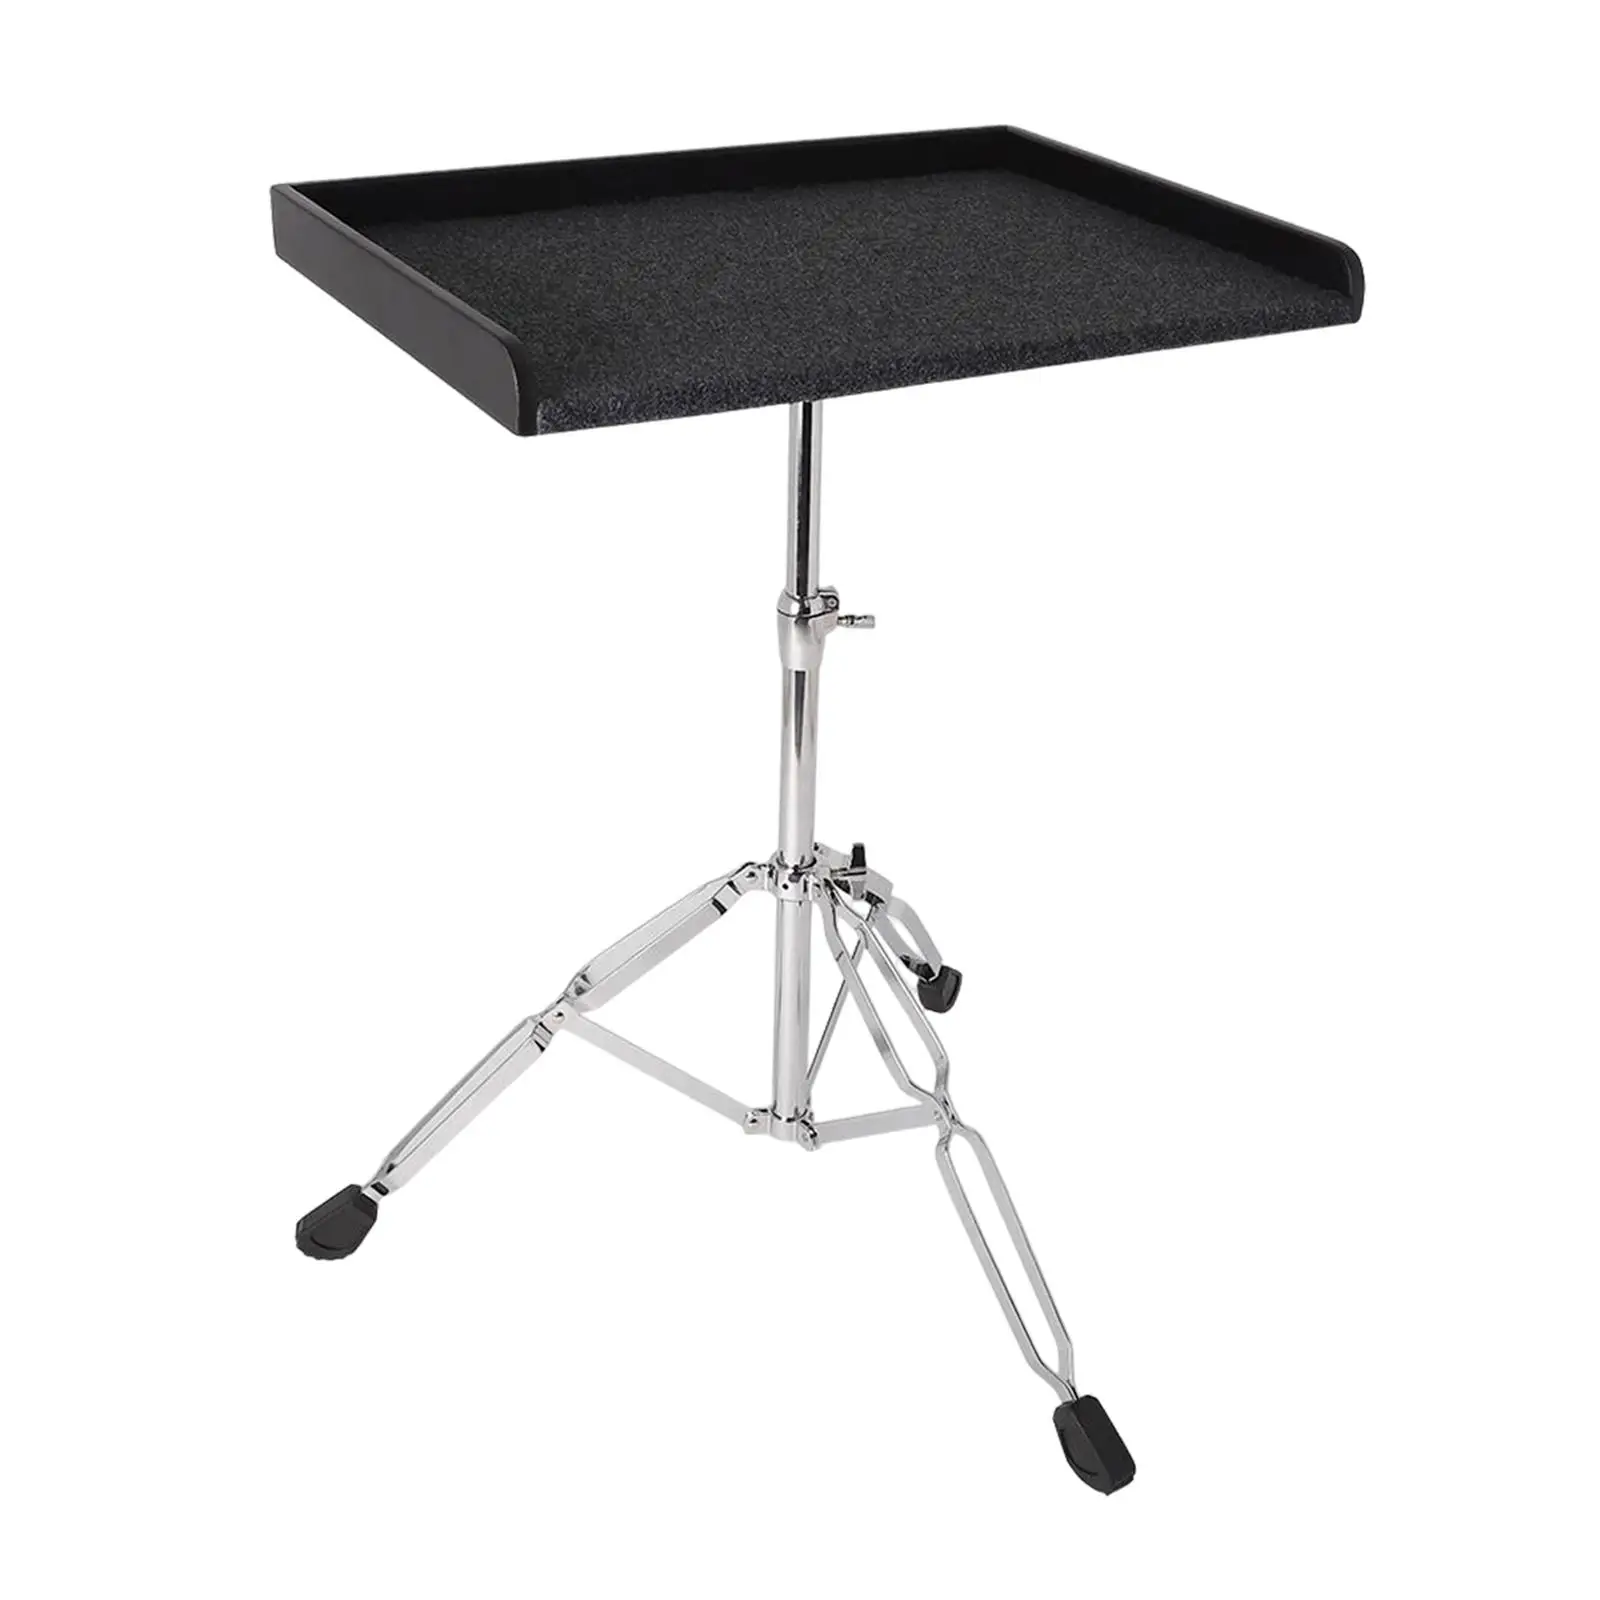 Professional Percussion Table Mount Holder Adjustable Thick EVA Padded Drum